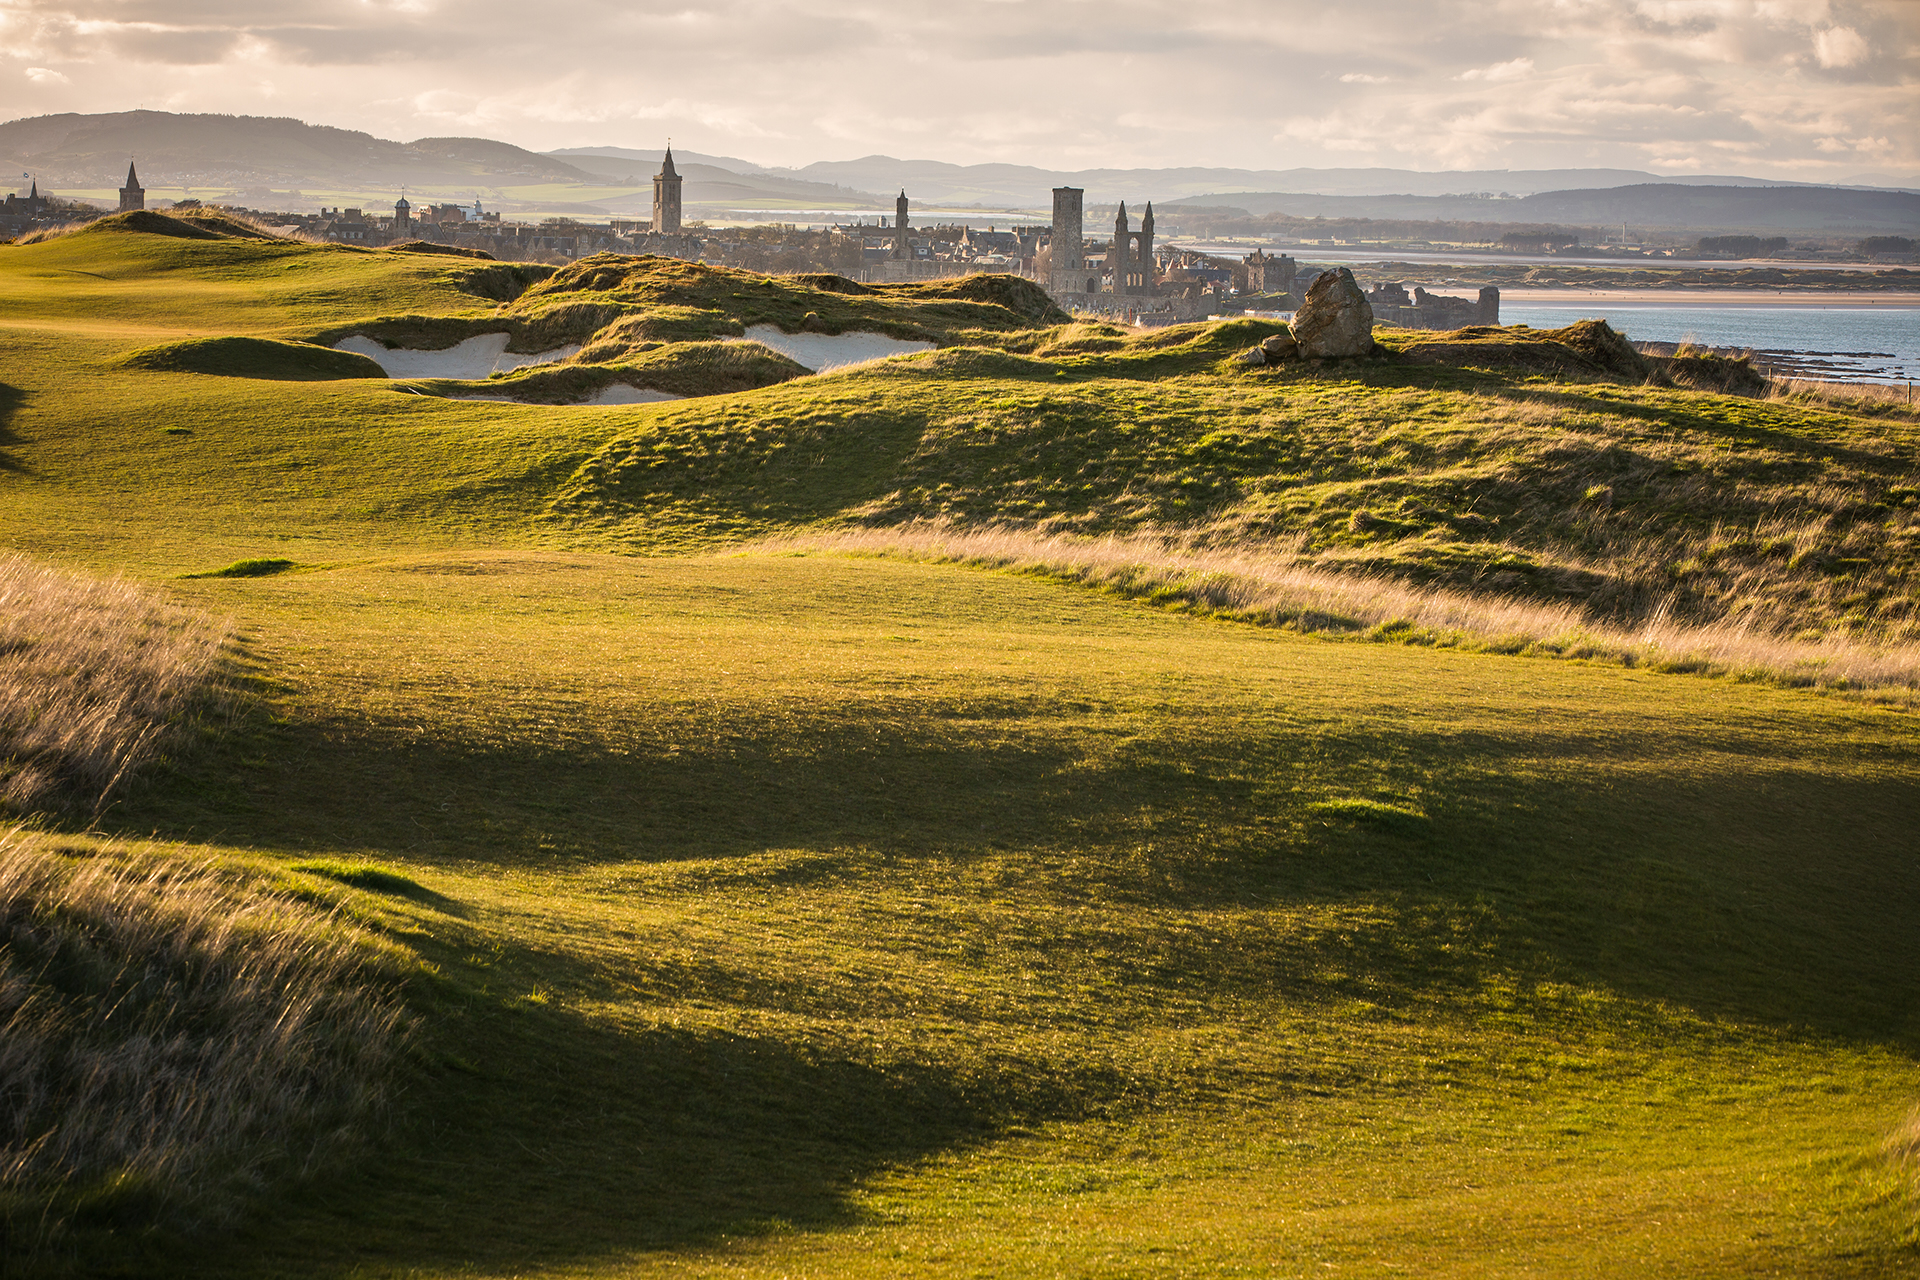 The history of golf is vital to the Scottish culture. It's a source of  great pride.